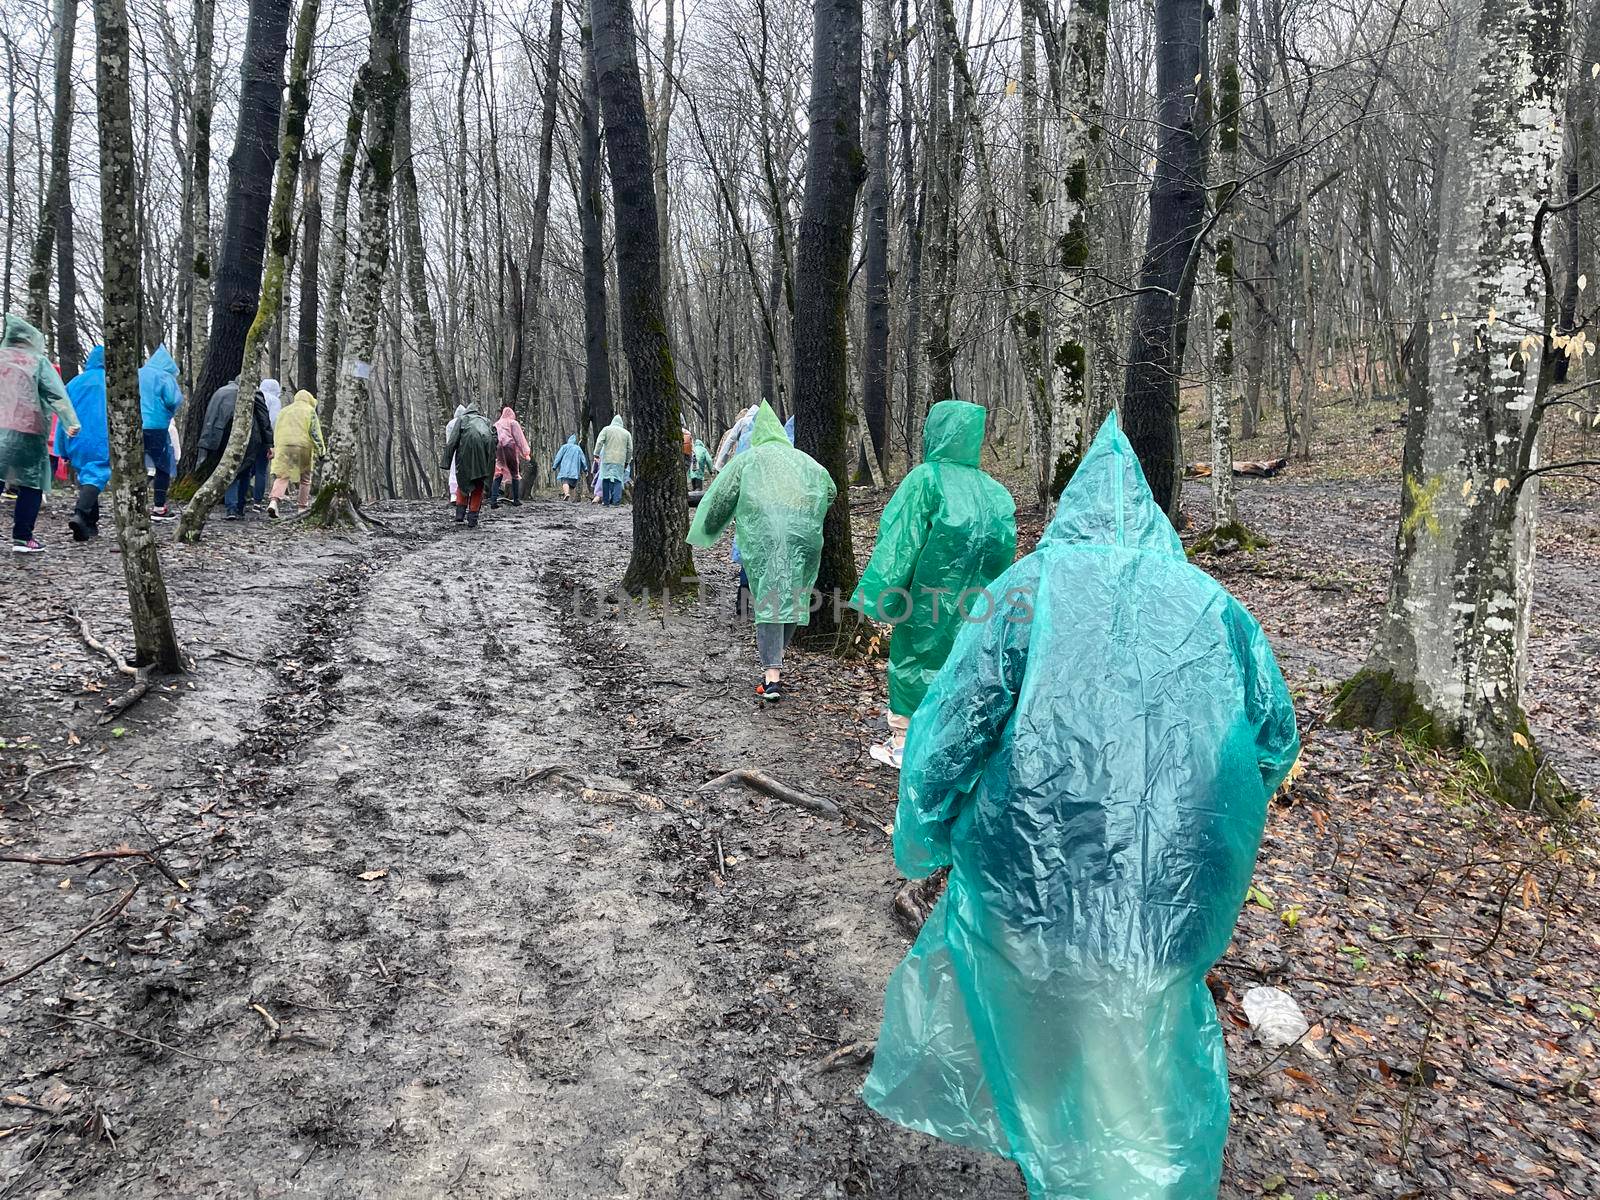 Rear view of tourists in raincoats walking through muddy forest in cloudy and rainy weather. Group of people hiking in wooded and hilly terrain